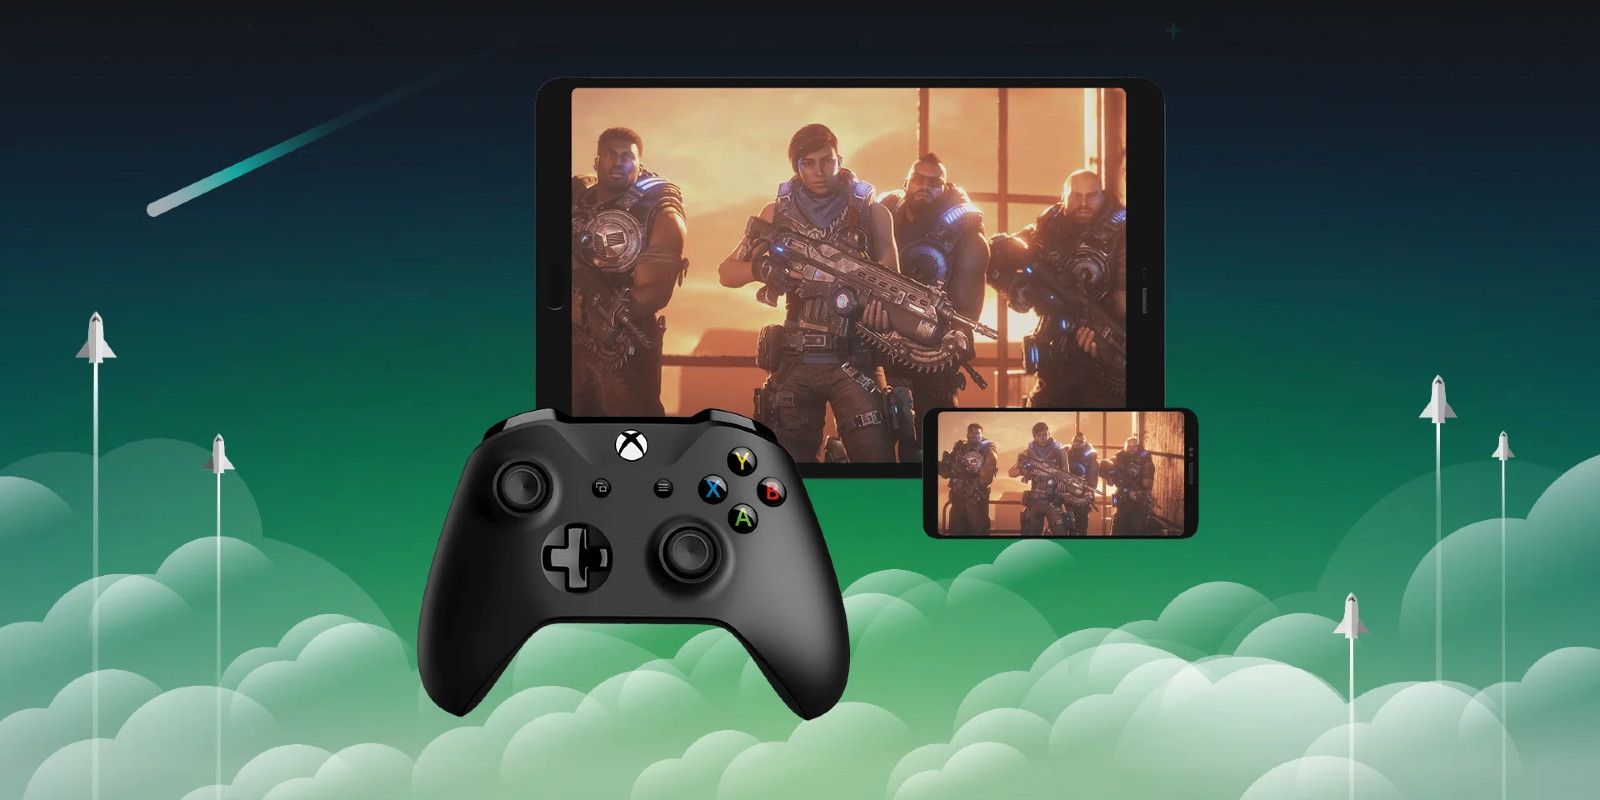 EXCLUSIVE: XCloud for PC (Xbox Game Pass cloud streaming) 